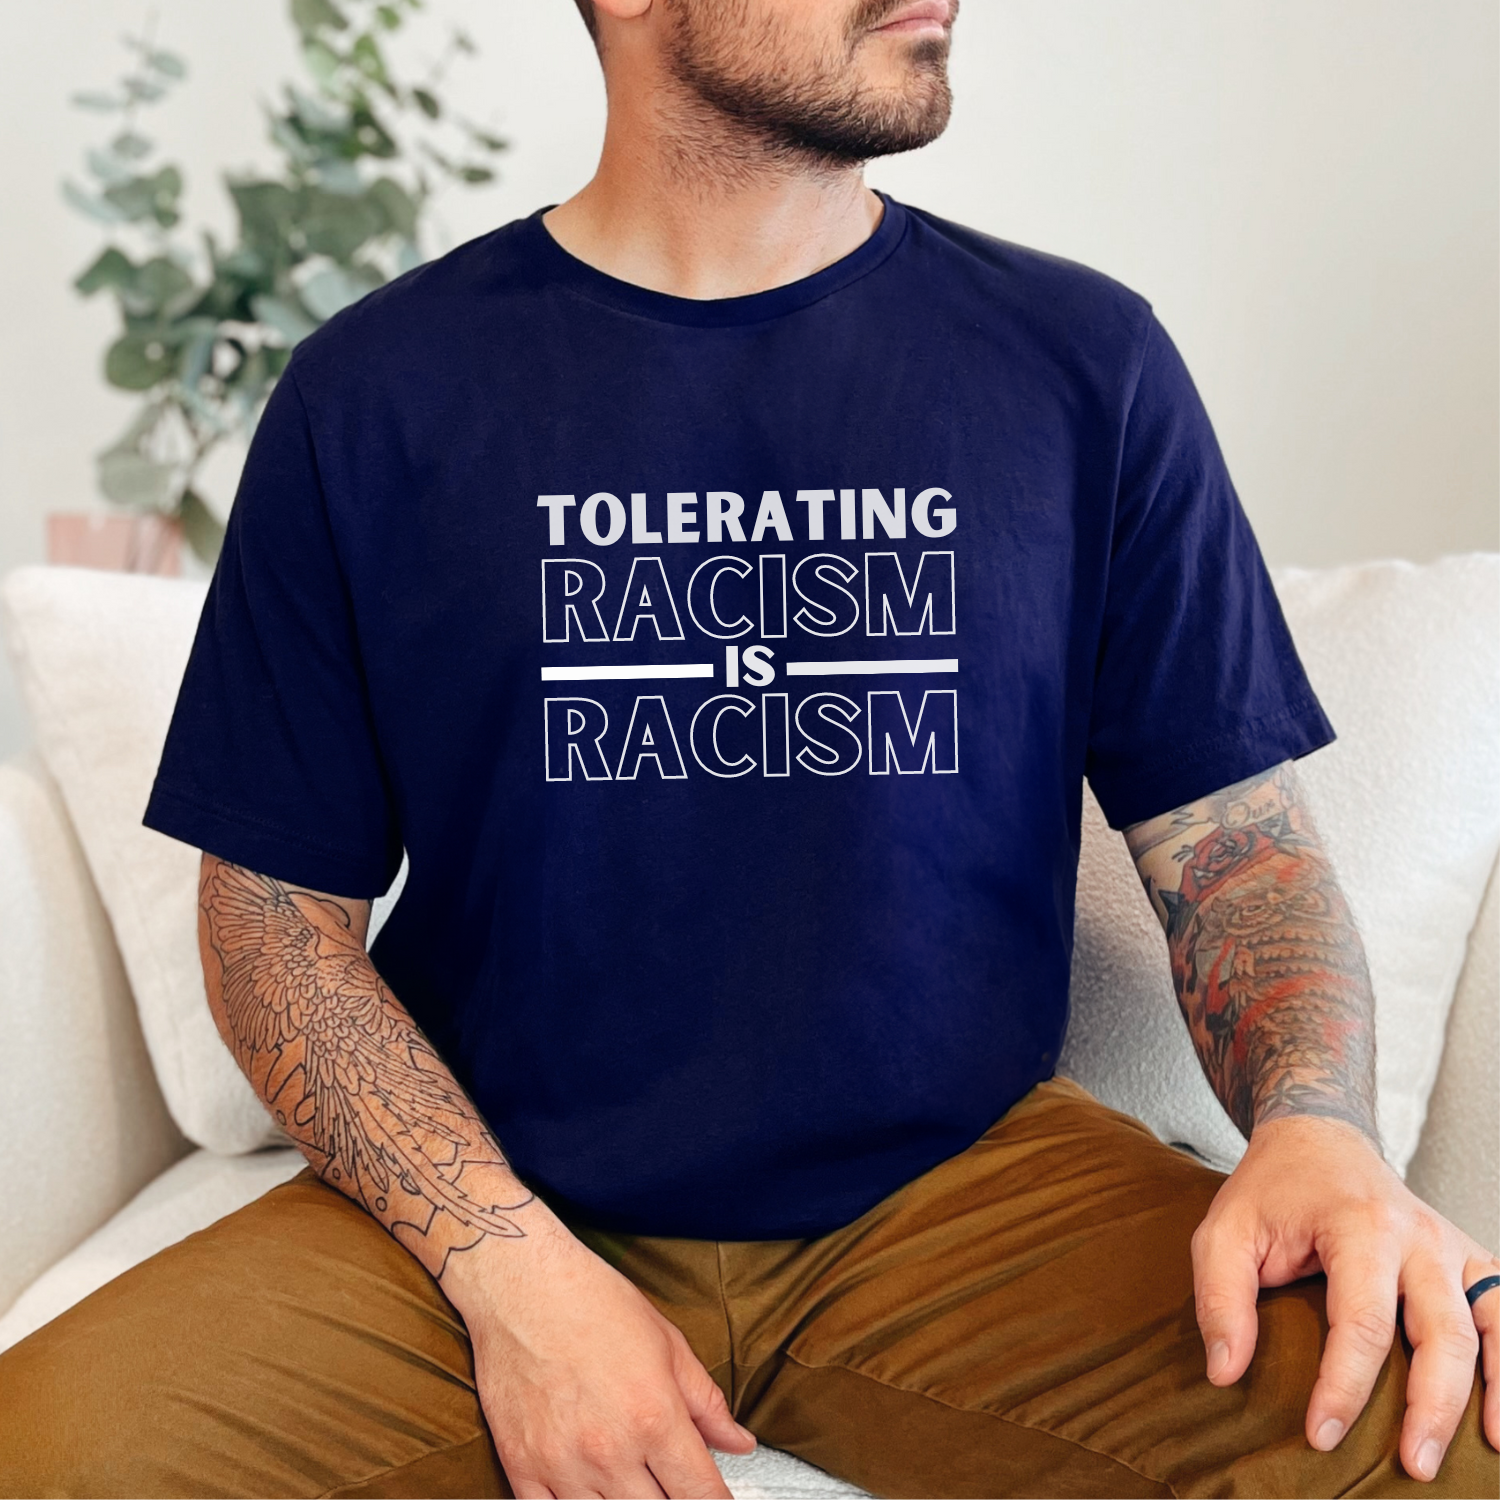 Show your commitment to social justice and awareness with this tee that states, 'Tolerating racism is racism.' - Bella Canvas 3001 in navy.